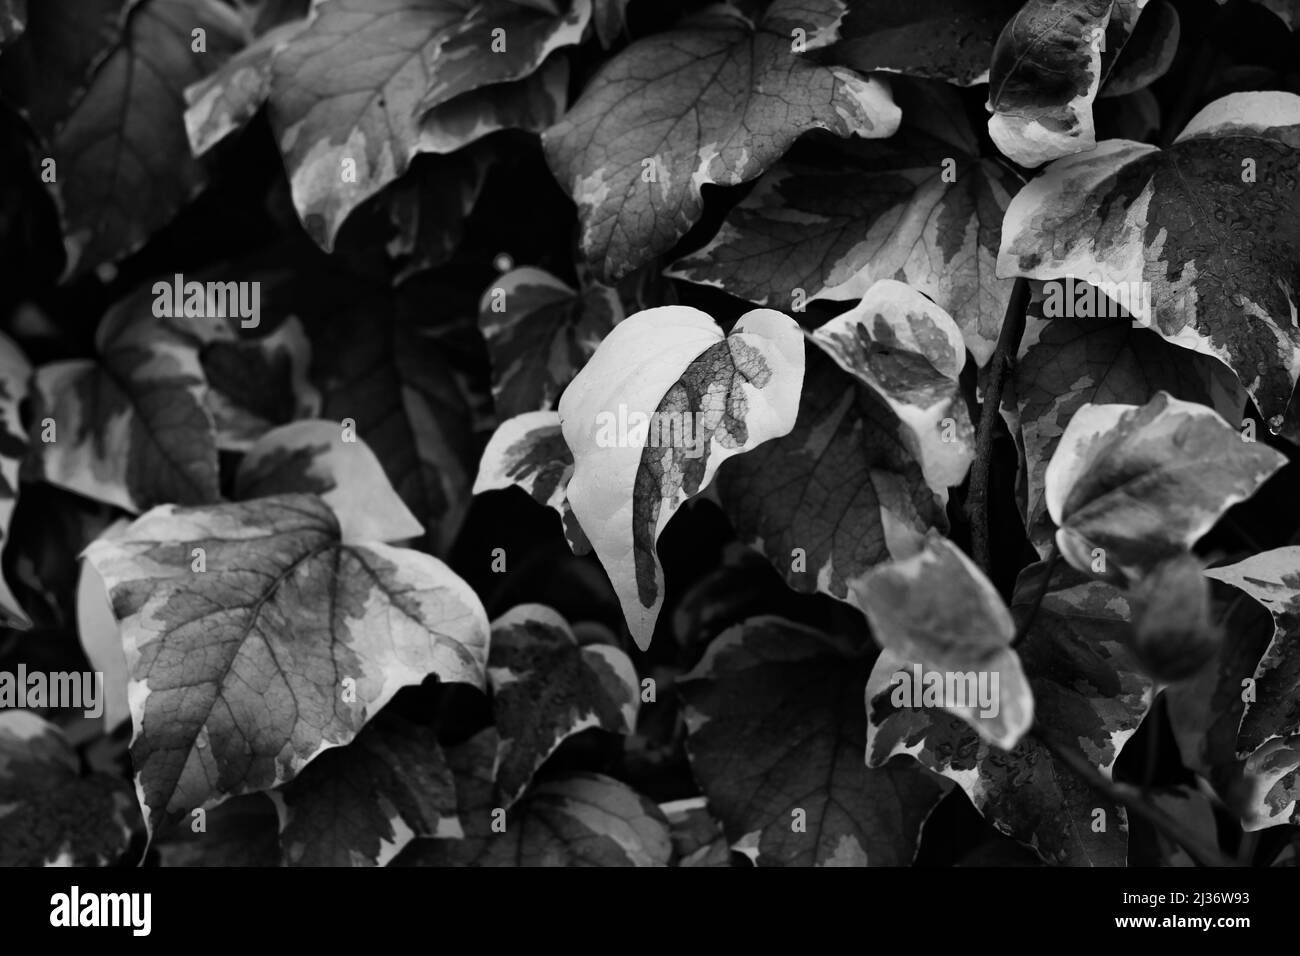 Beautiful leafy plants growing in the picturesque garden in black and white grayscale. Stock Photo